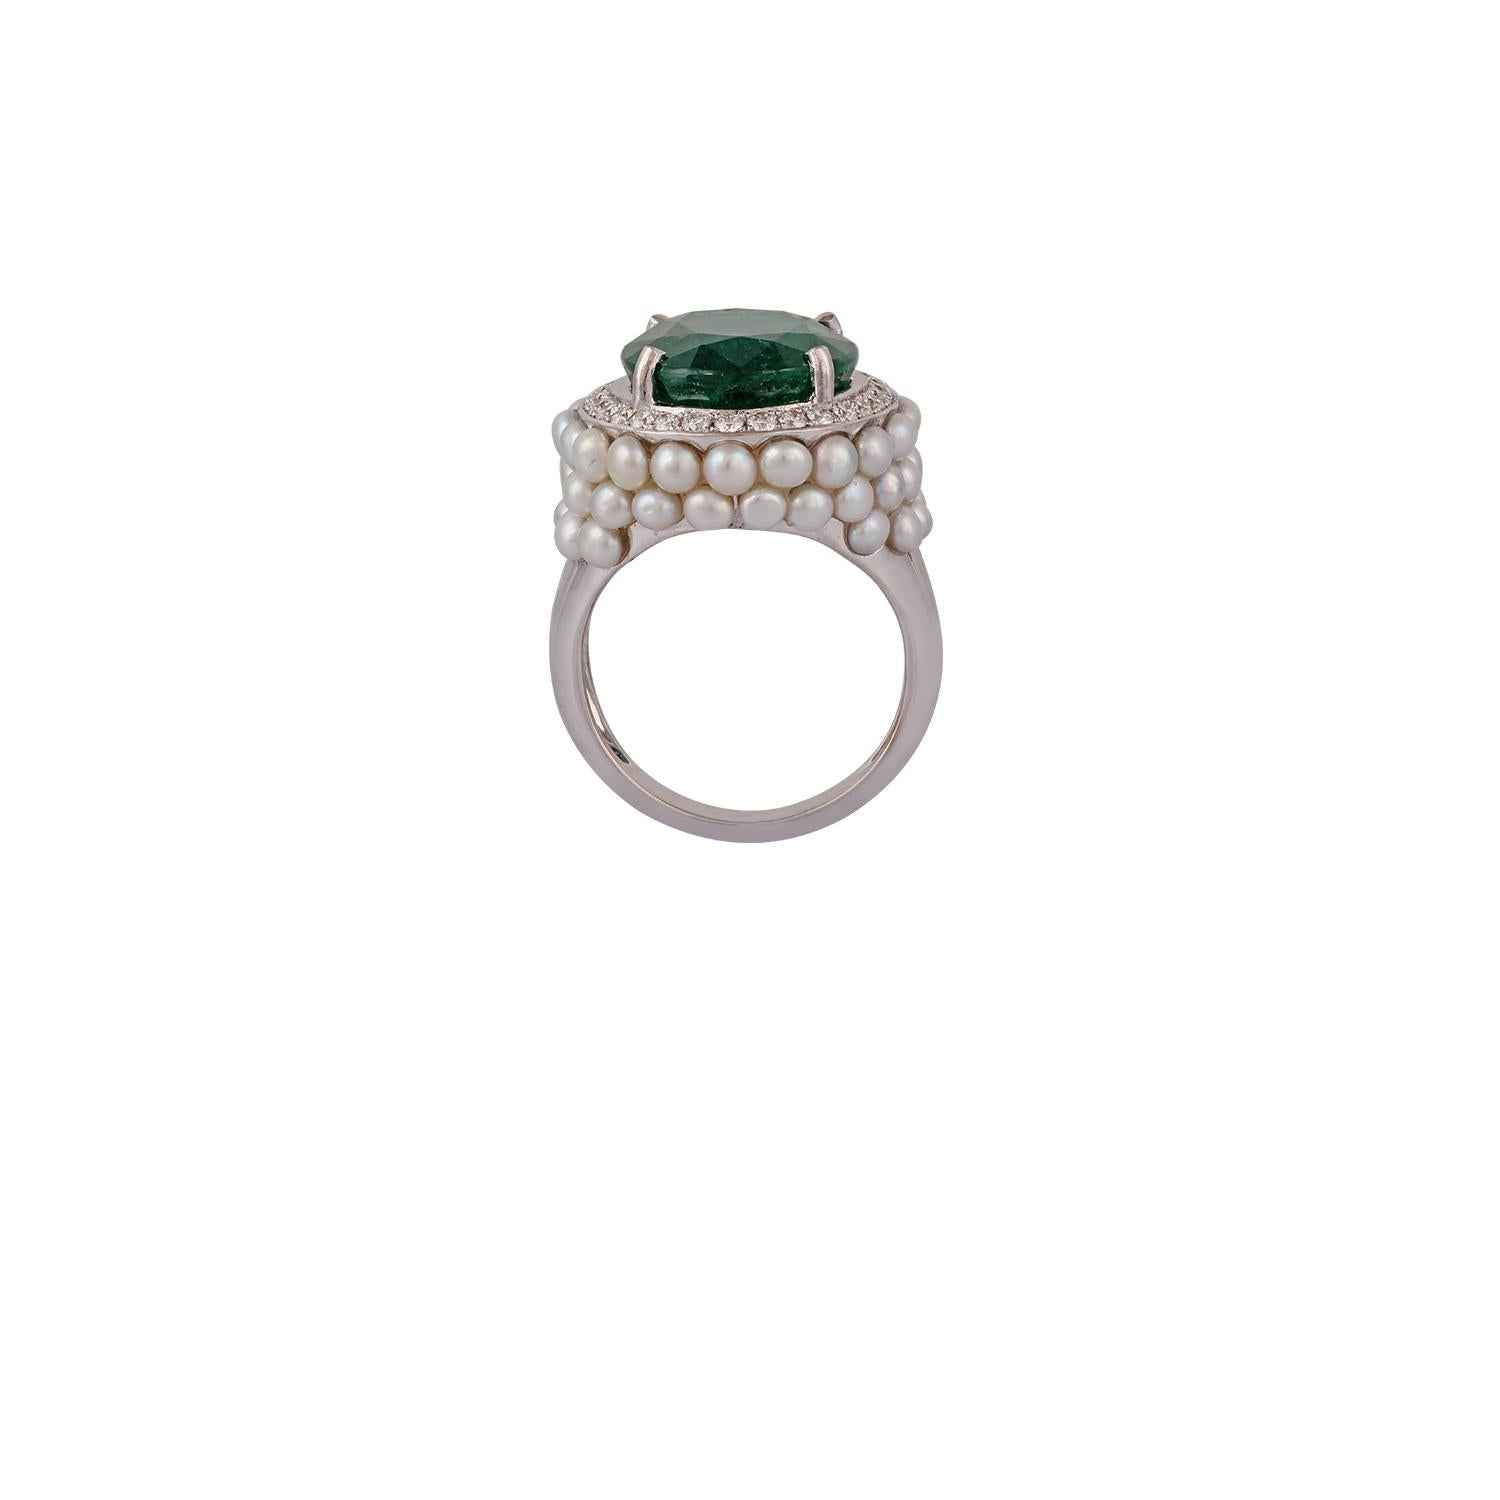 10.77 cts Clear Zambian Emerald, Pear & Diamond Double Cluster Ring in 18k Gold In New Condition For Sale In Jaipur, Rajasthan